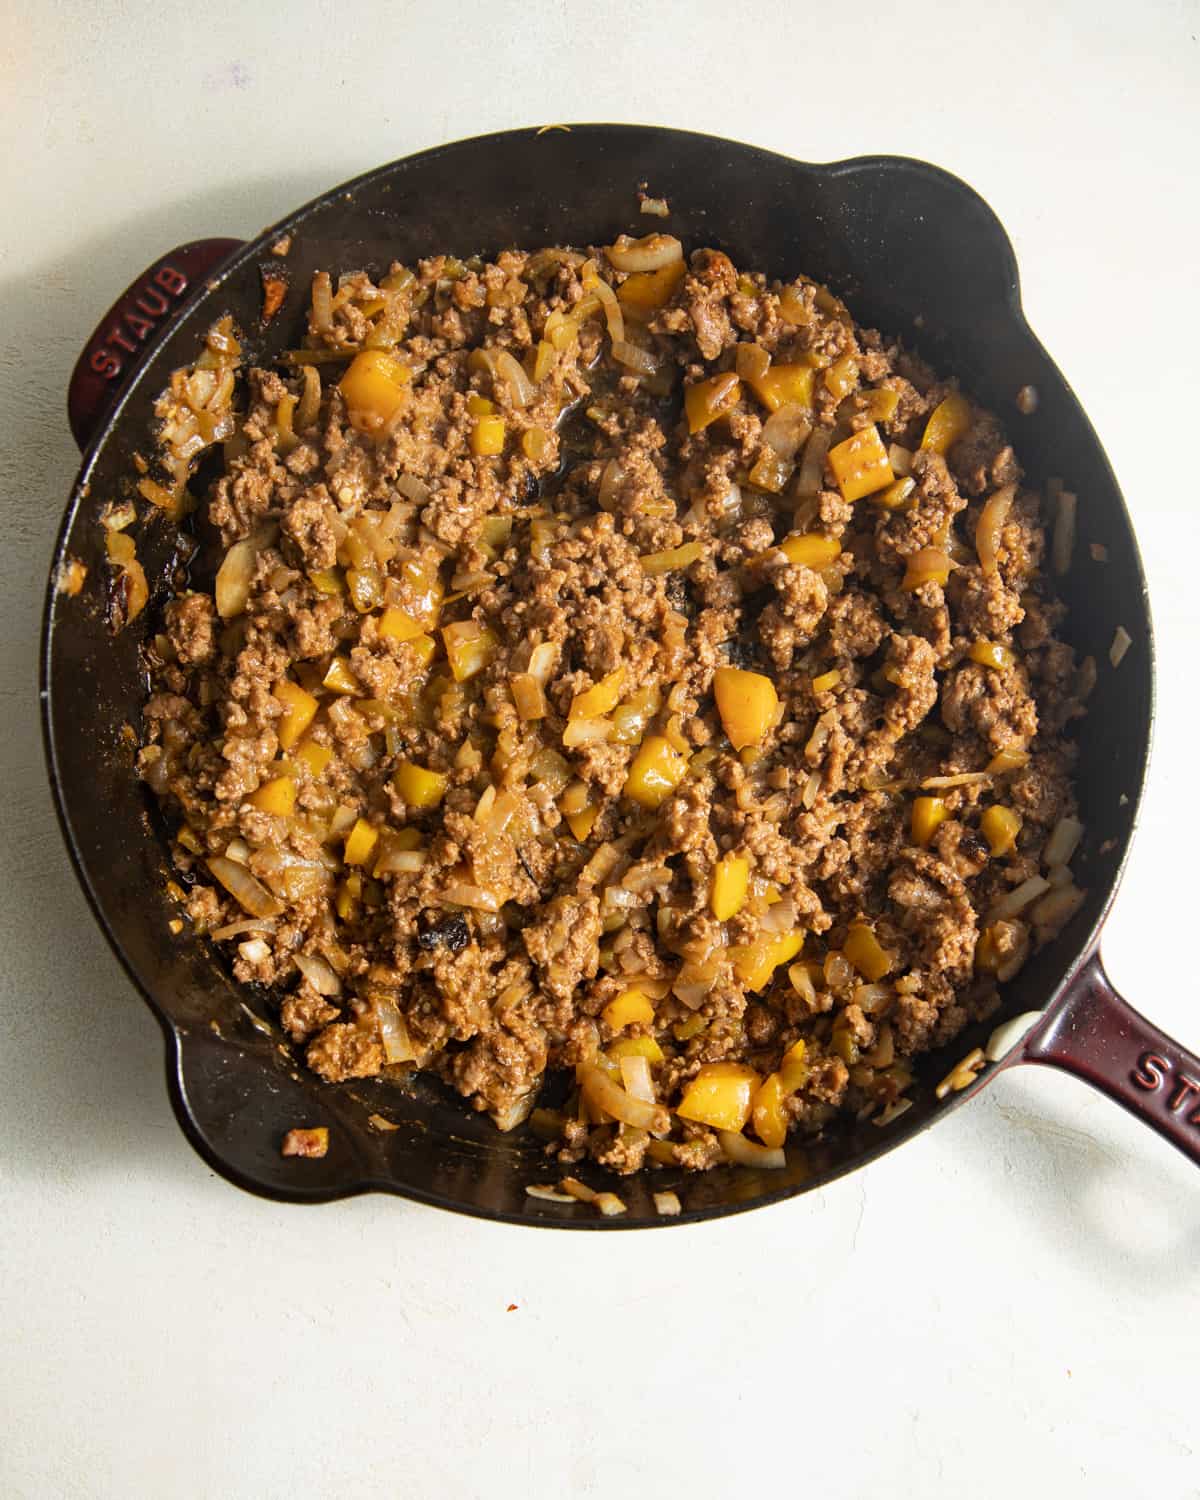 Browned ground beef with diced peppers and onions in a cast iron skillet.